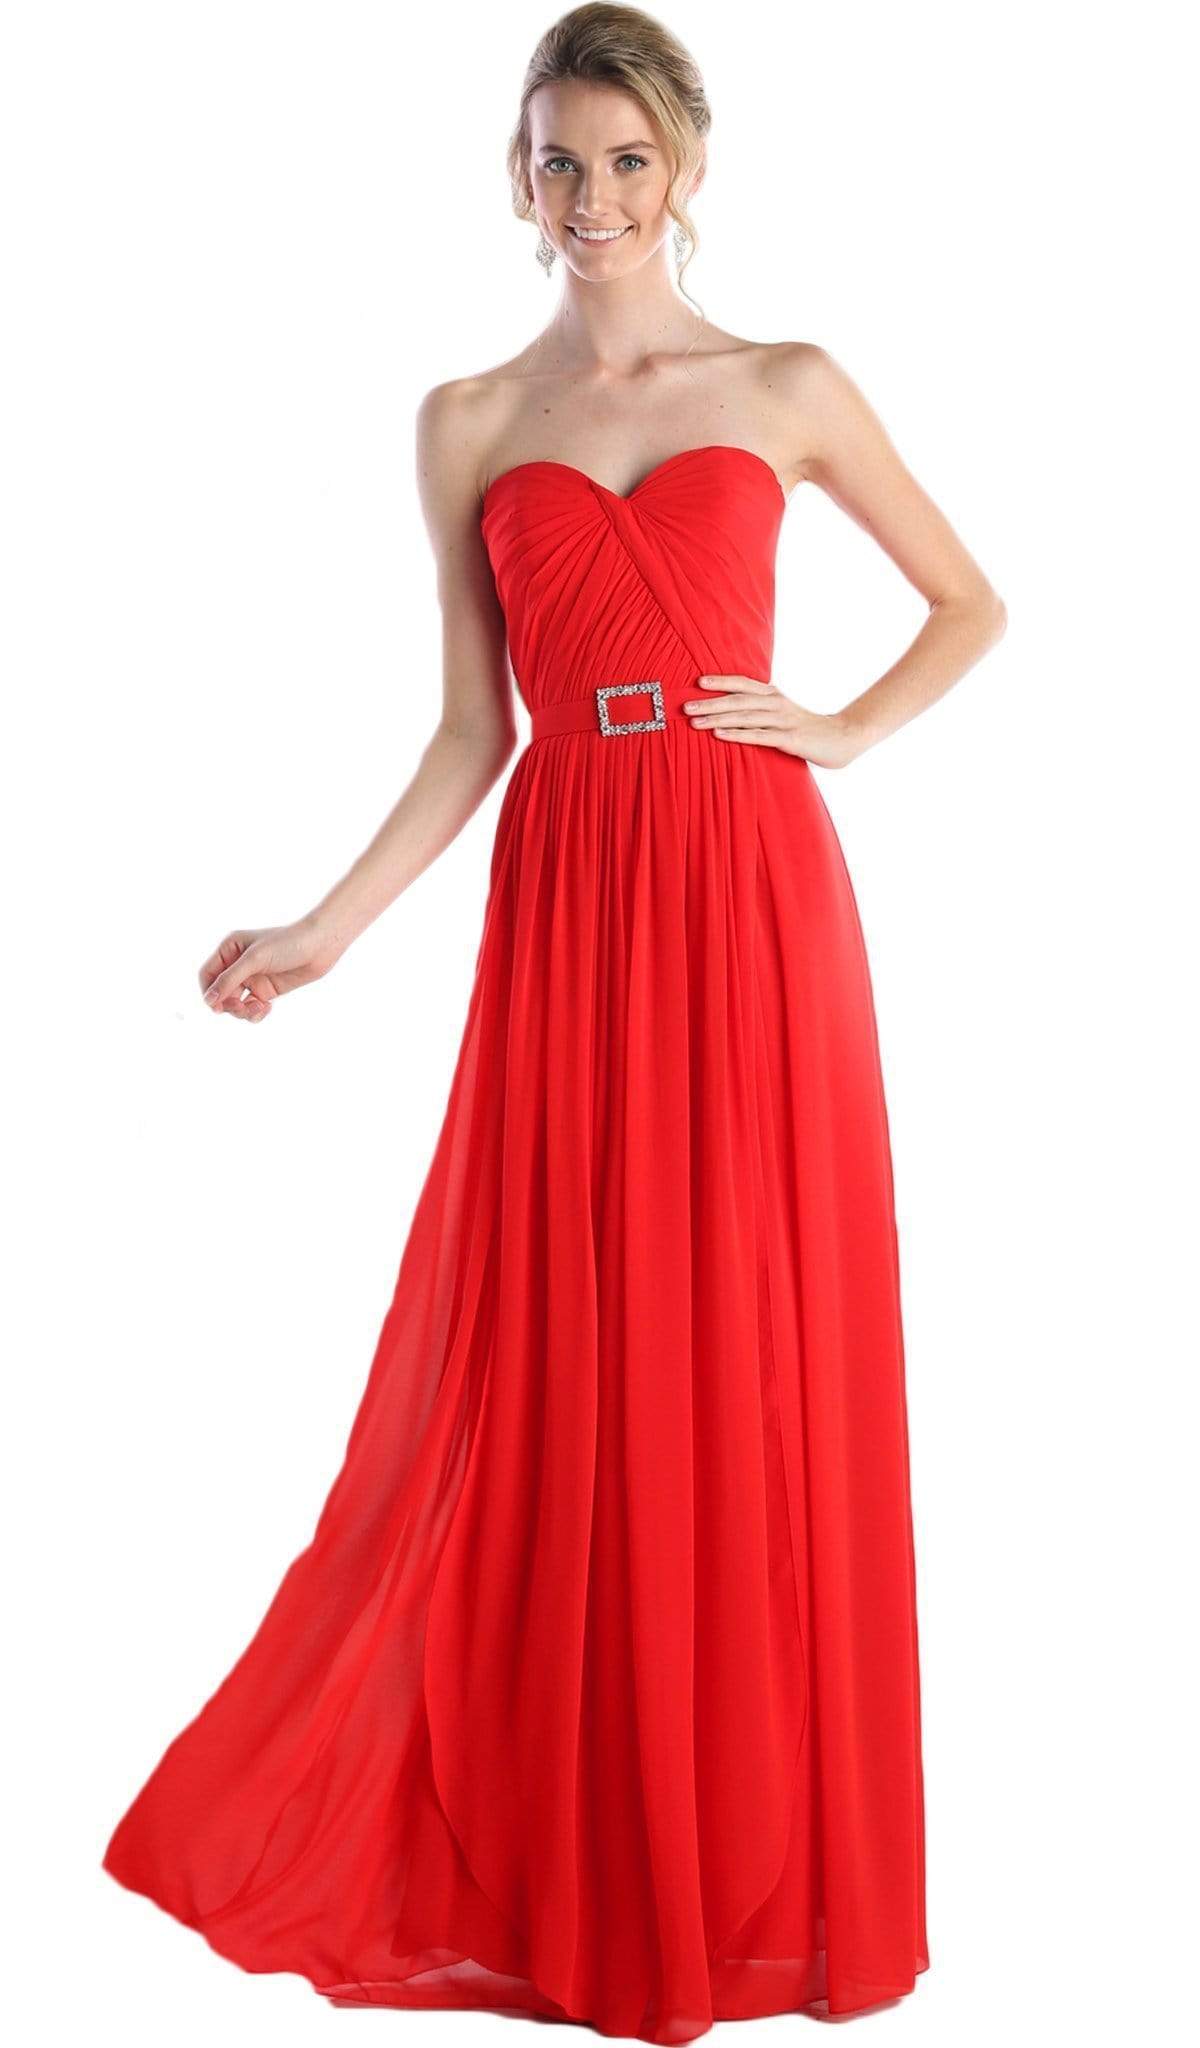 Cinderella Divine - Strapless Twined Front Chiffon Long Evening Gown
